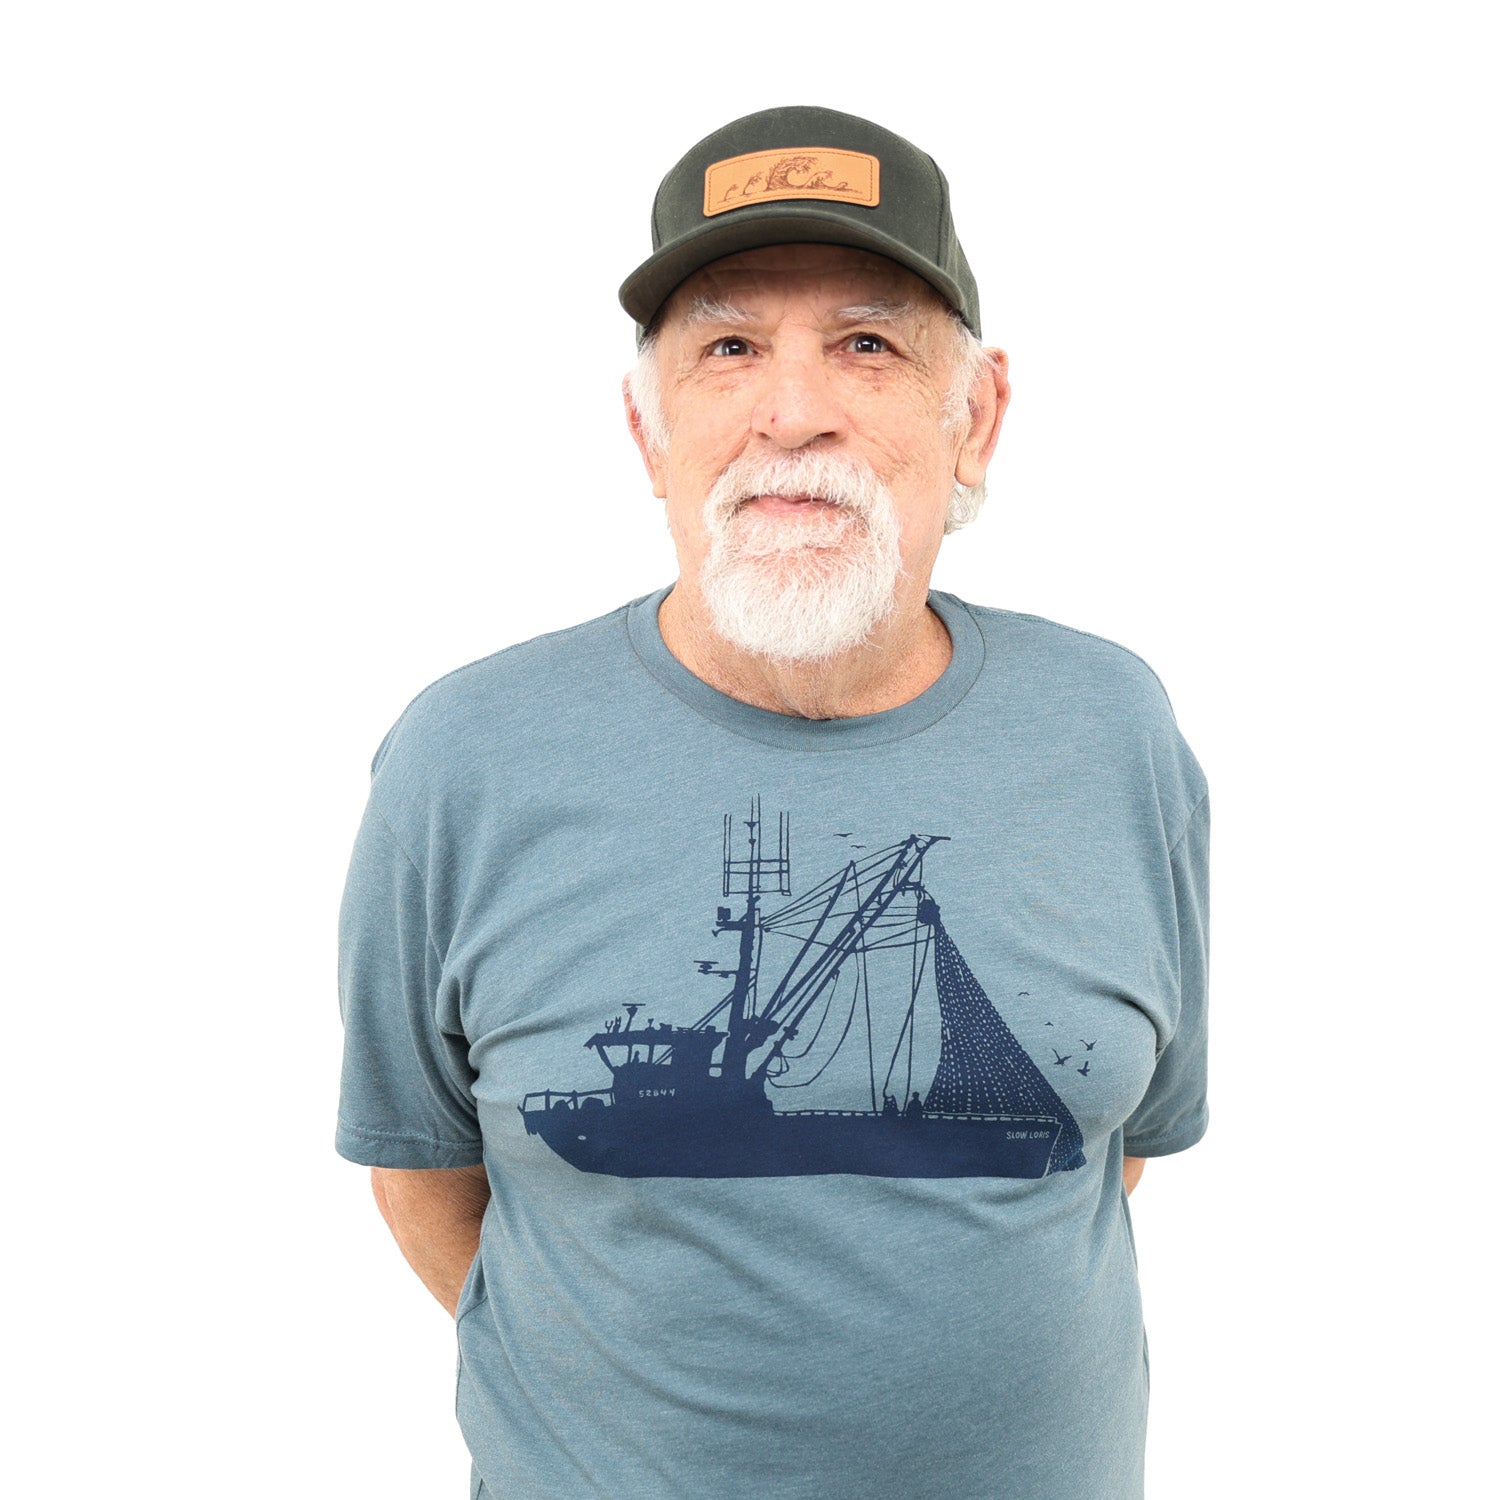 Closer view of man wearing ball cap and light blue shirt with dark blue ink of a seiner